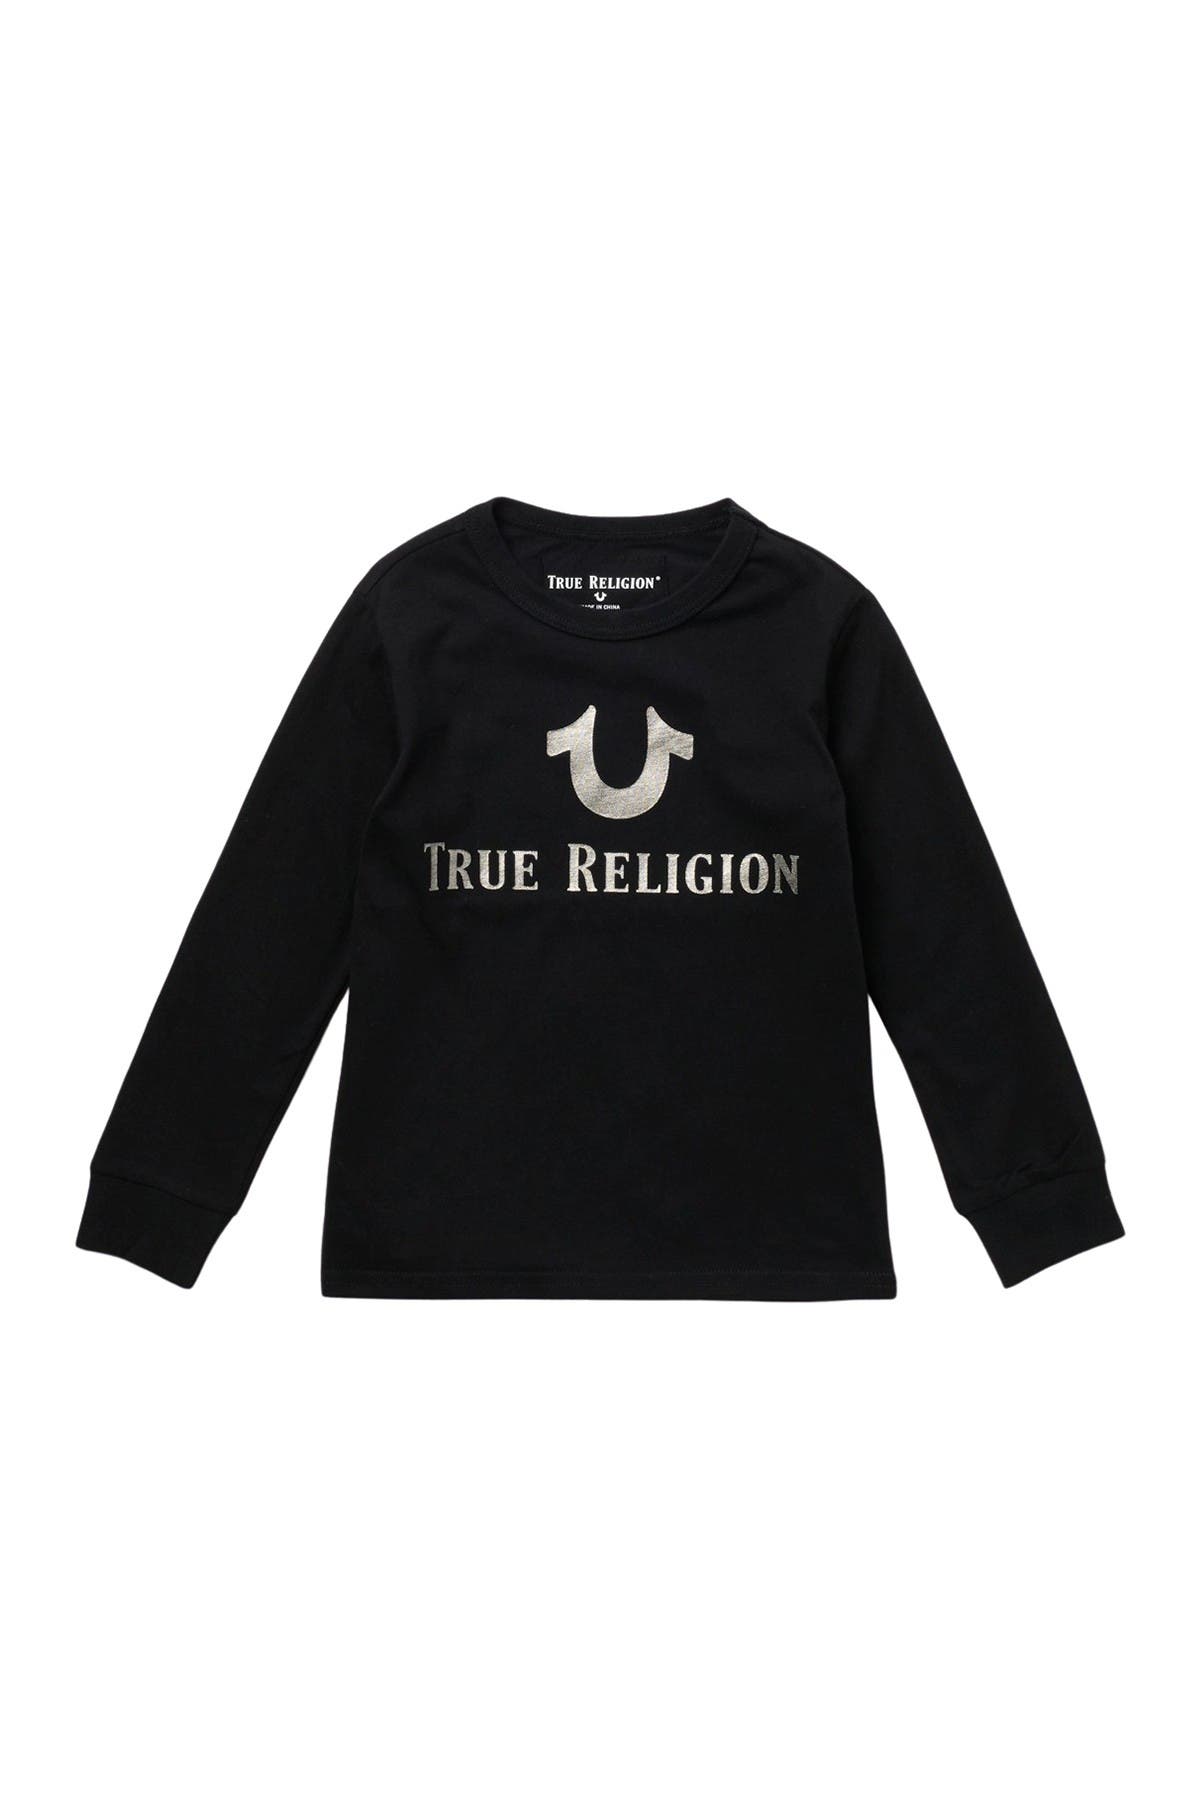 true religion shirts for toddlers